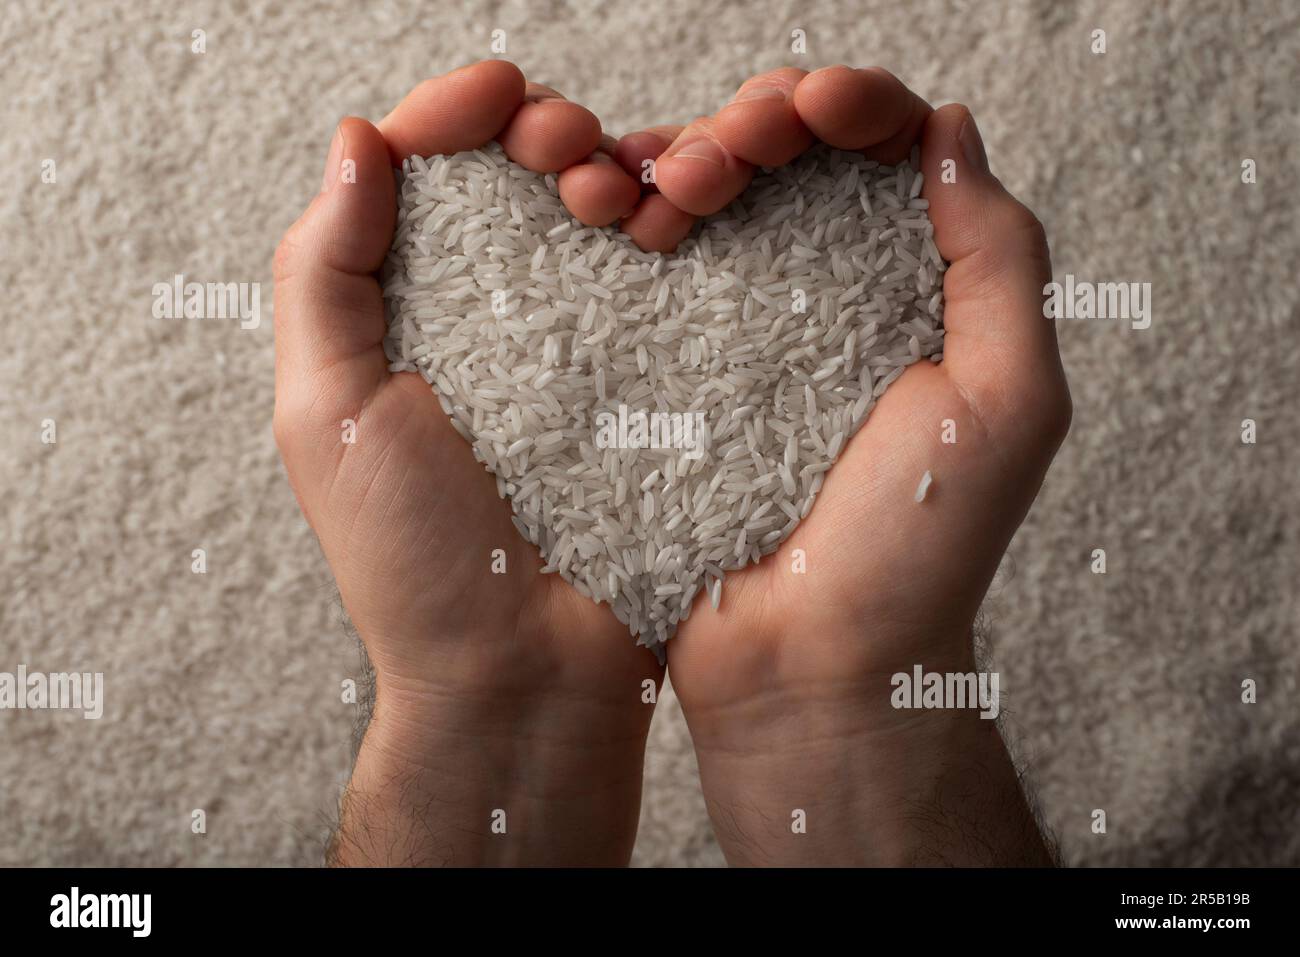 Human hands in shape of heart holding handful of rice on rice background Stock Photo